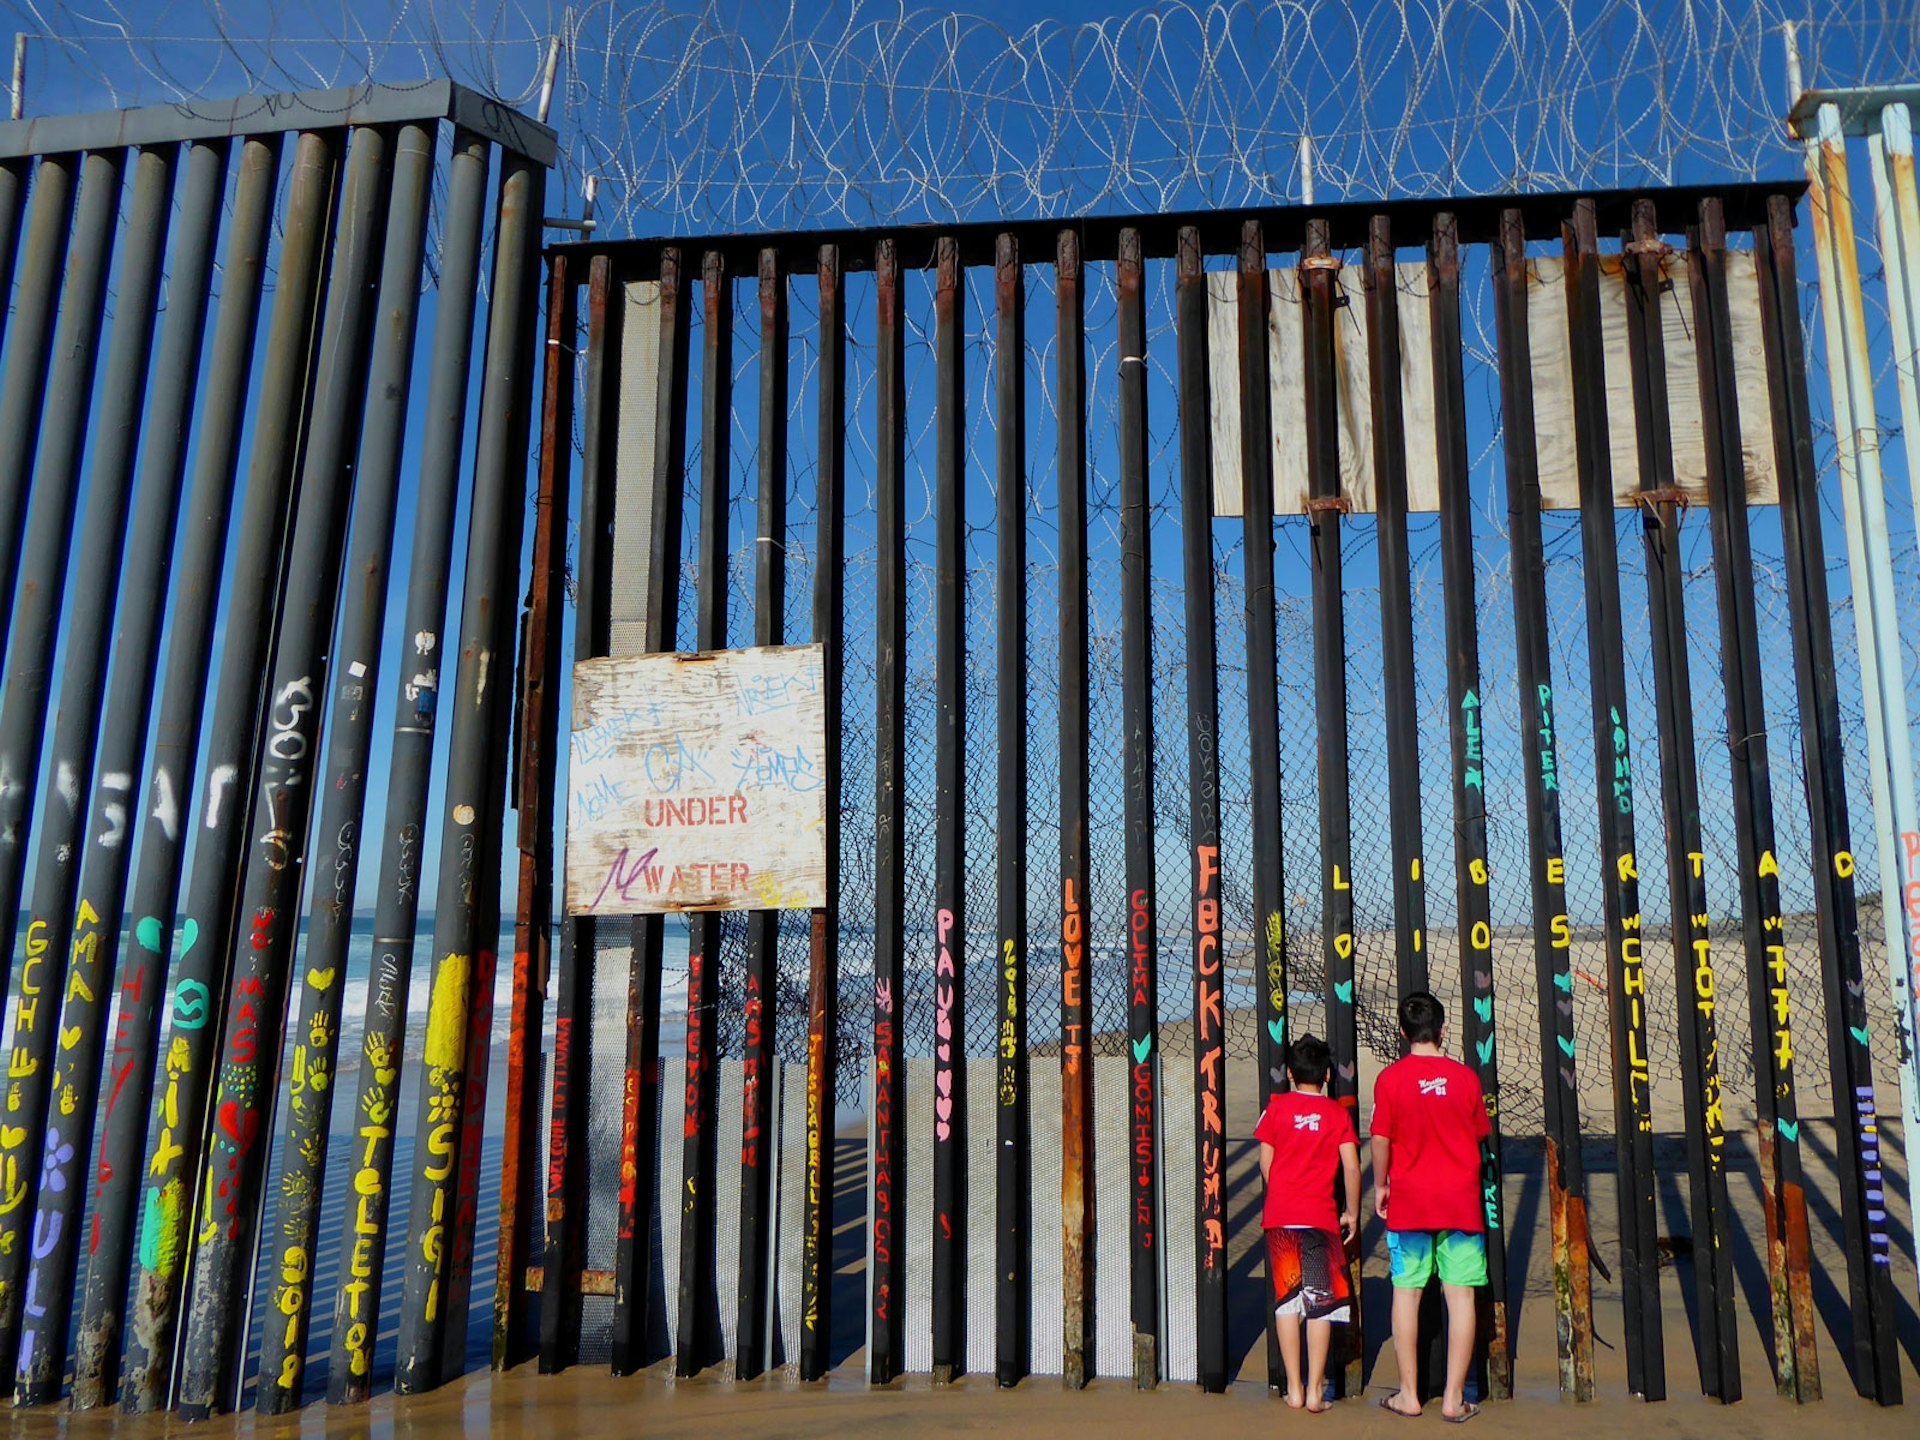 Two boys in red t-shirts stare through a wall of steel bars heavily covered in graffiti with chicken wire on the top